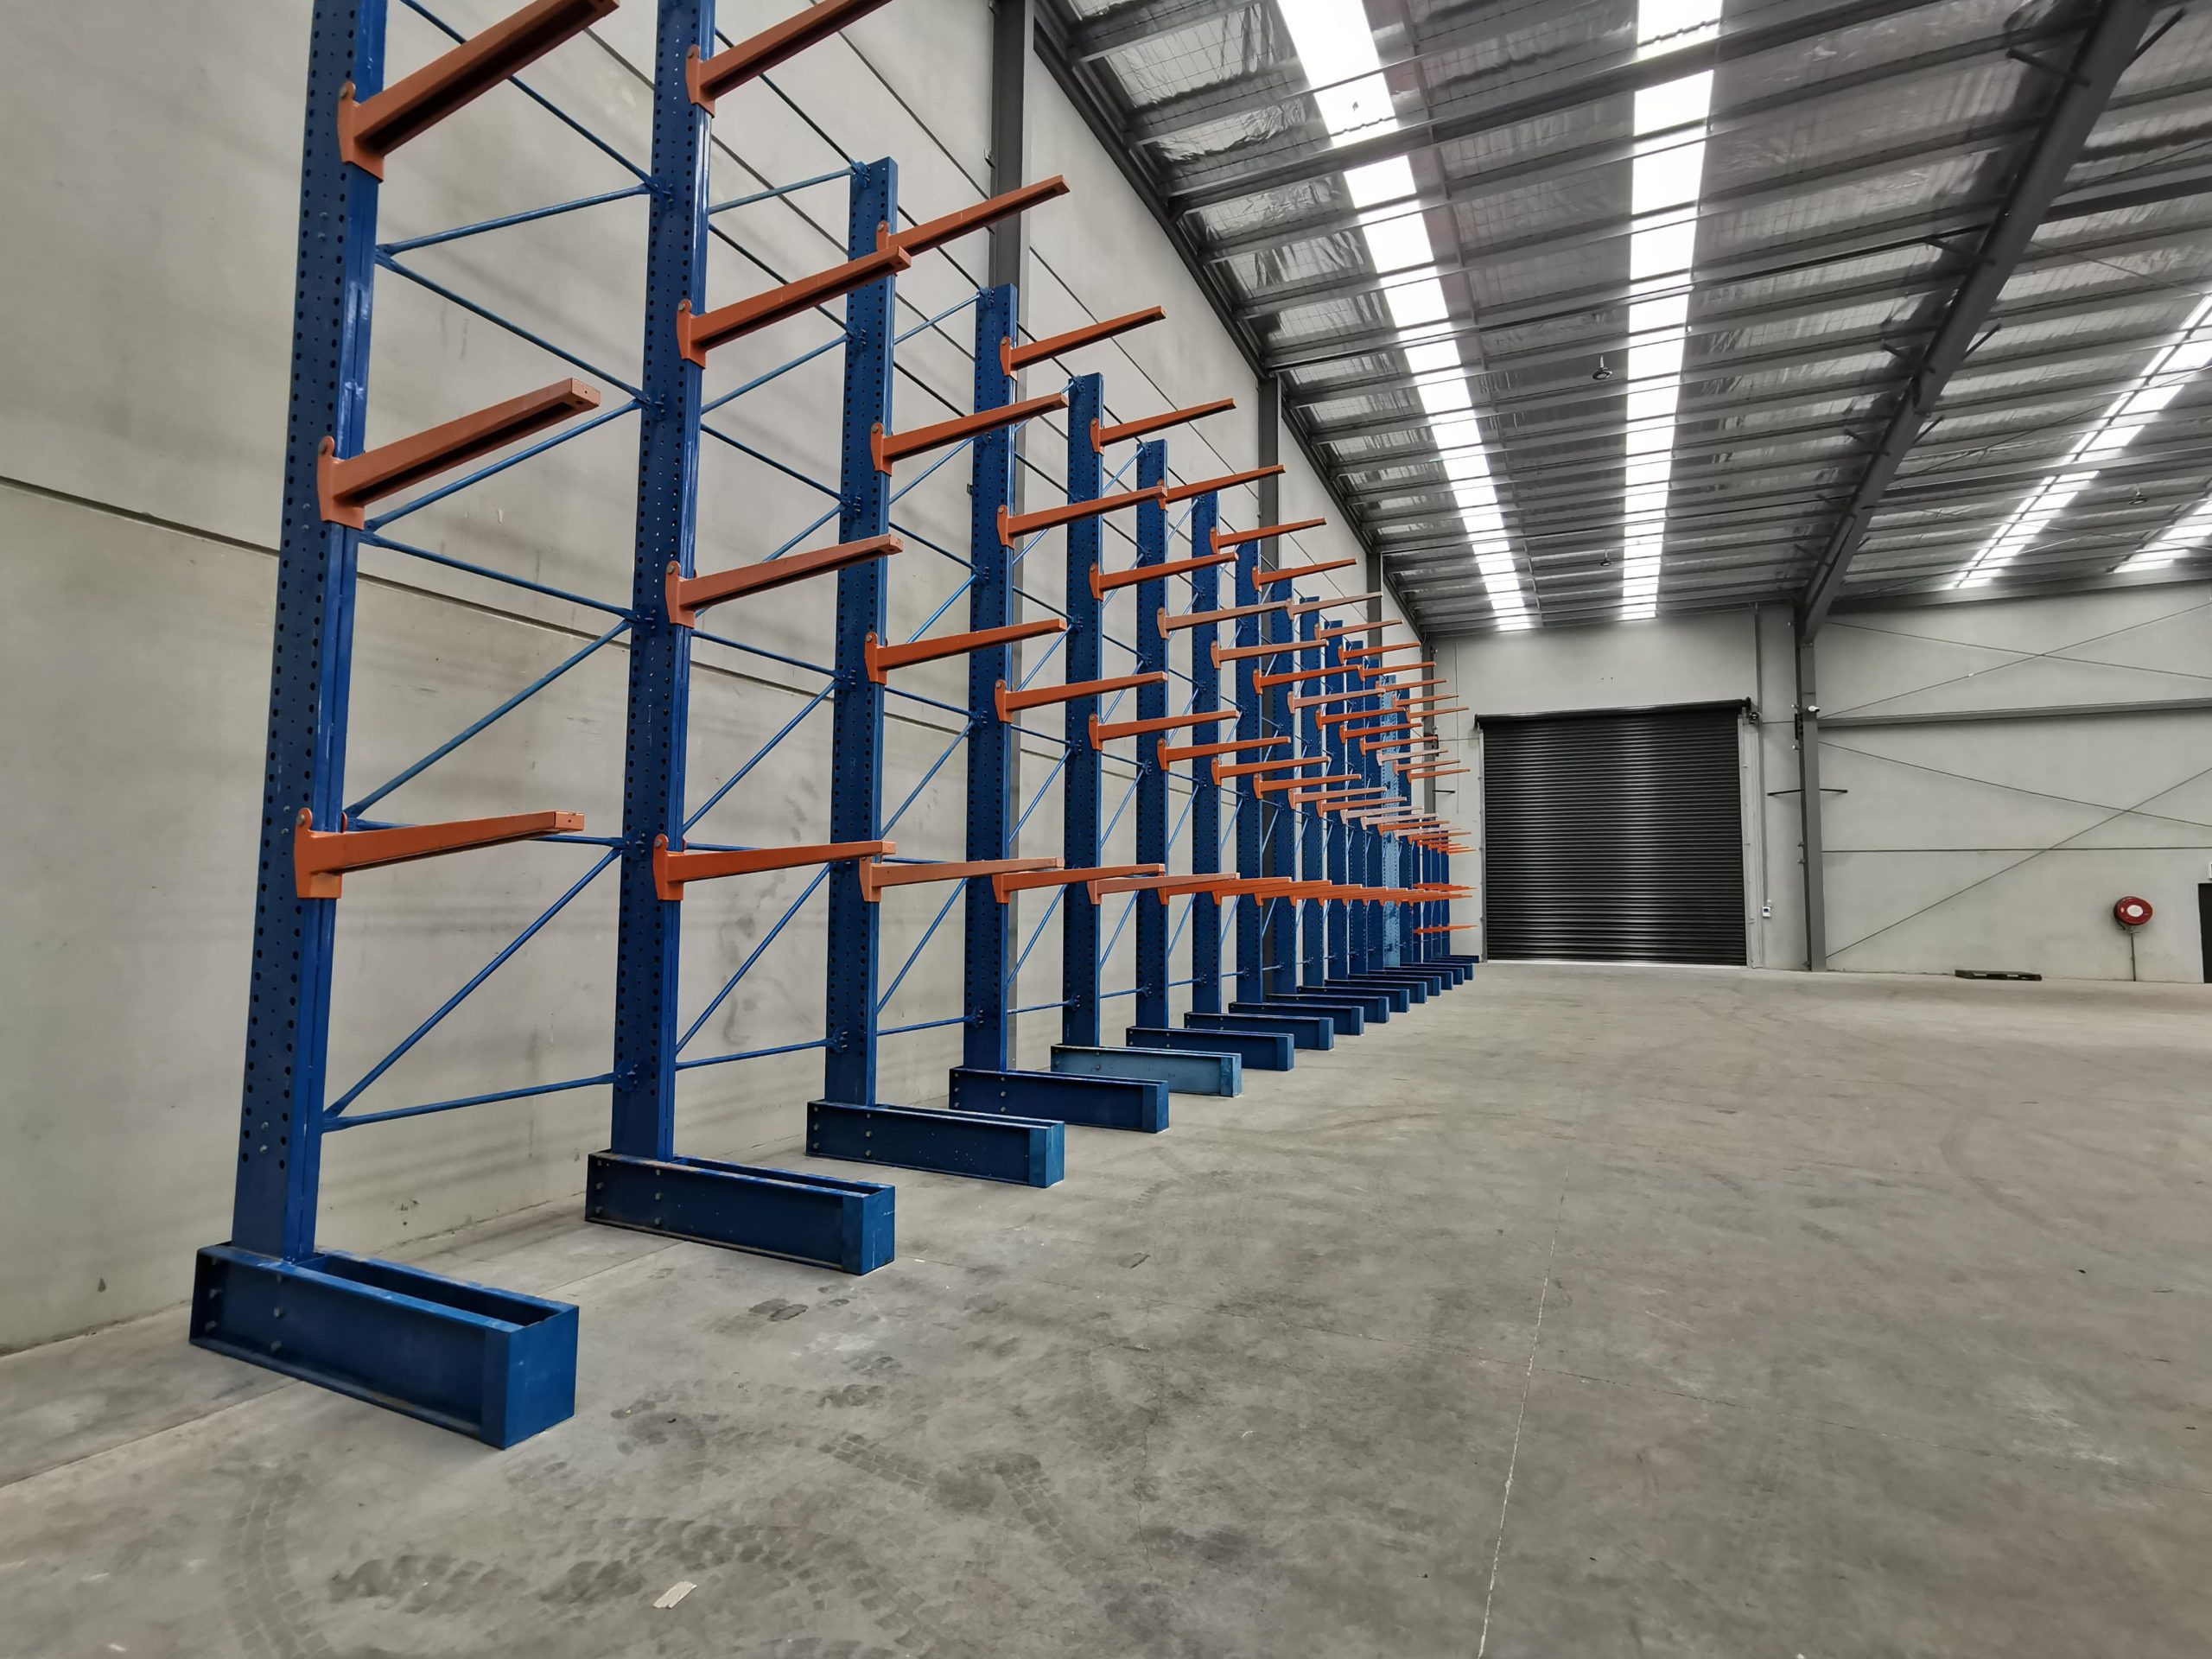 Finding Storage Solutions for Your Commercial Premises